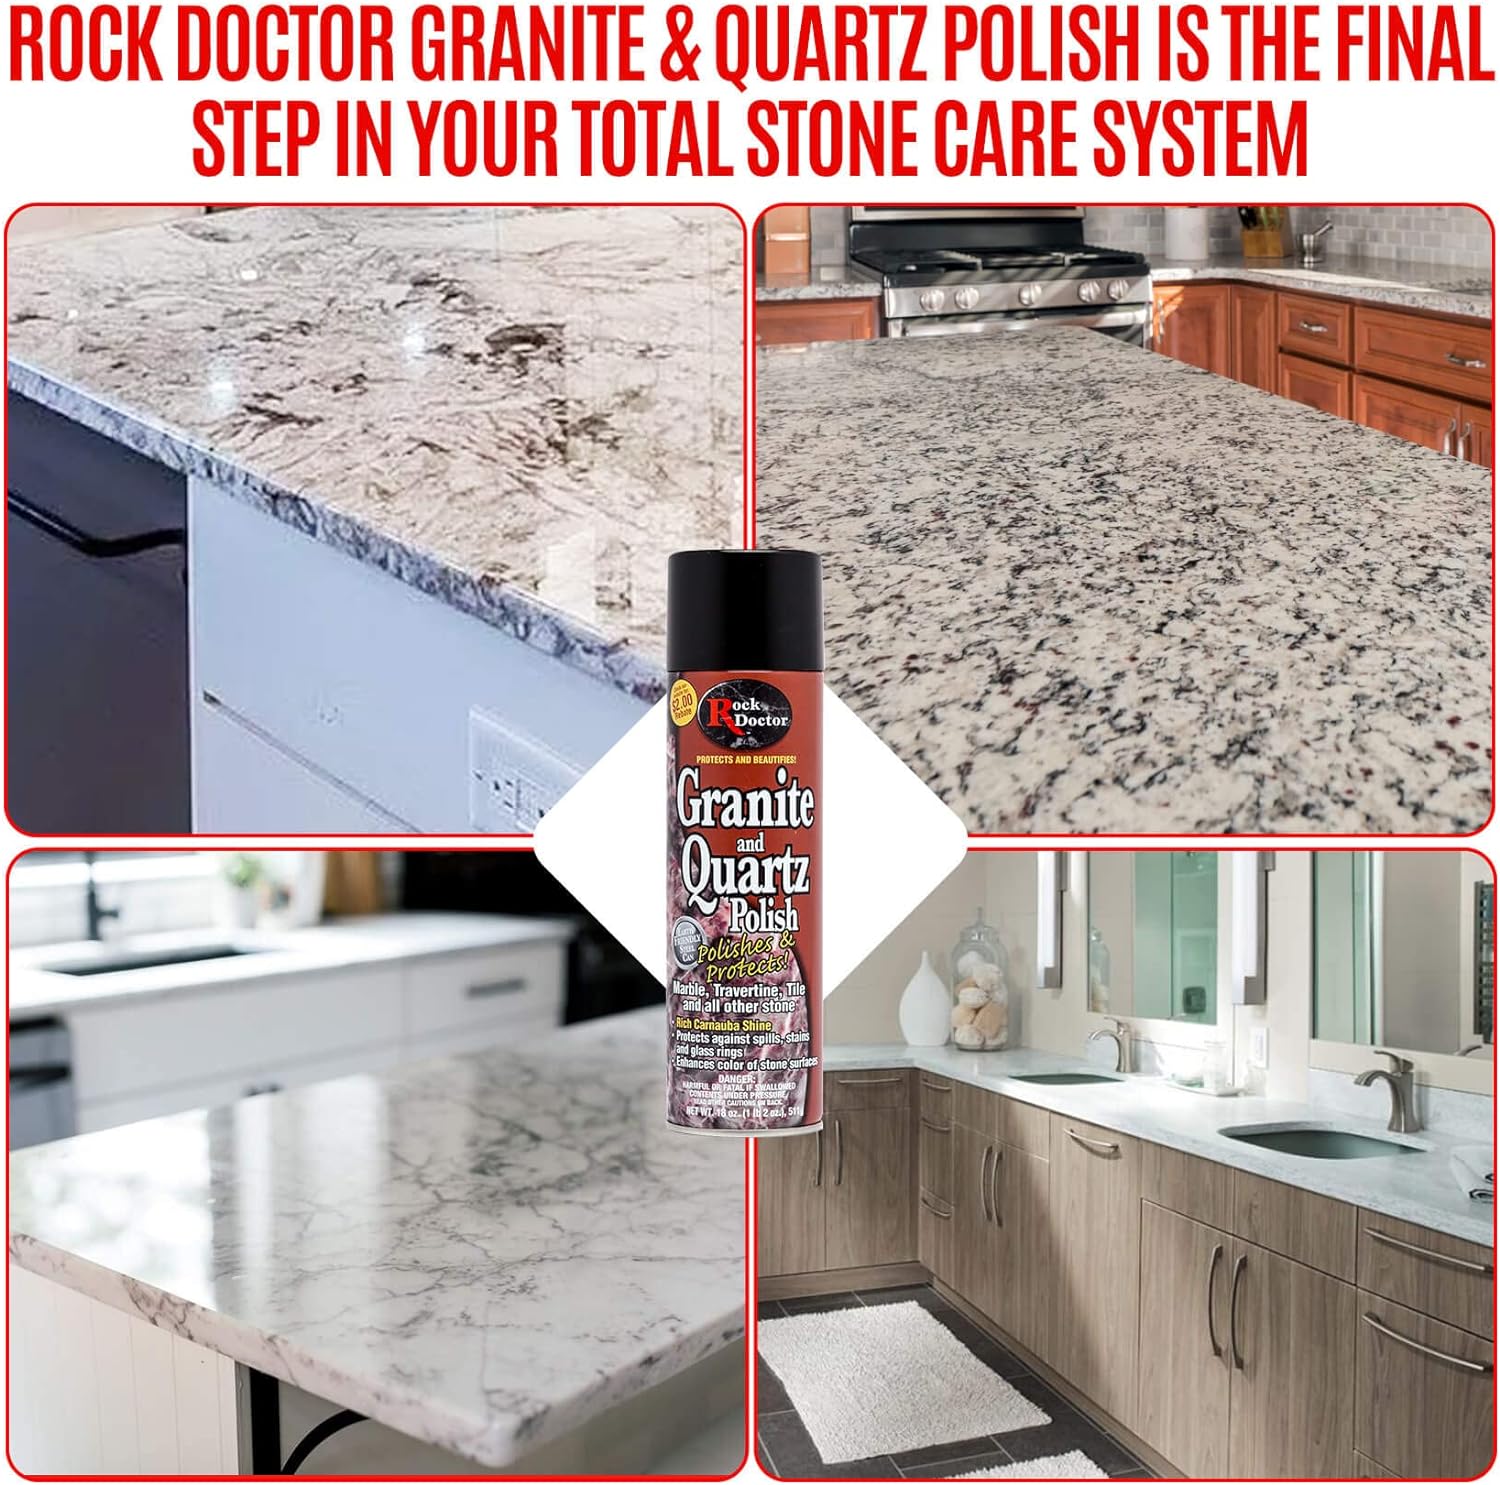 Rock Doctor Granite Polish Spray and Surface, 18 oz. Can, Polish Tile, Marble, Kitchen Countertop, and Natural Stone Surfaces, Streak-Free Shine Pack of 1 : Health & Household